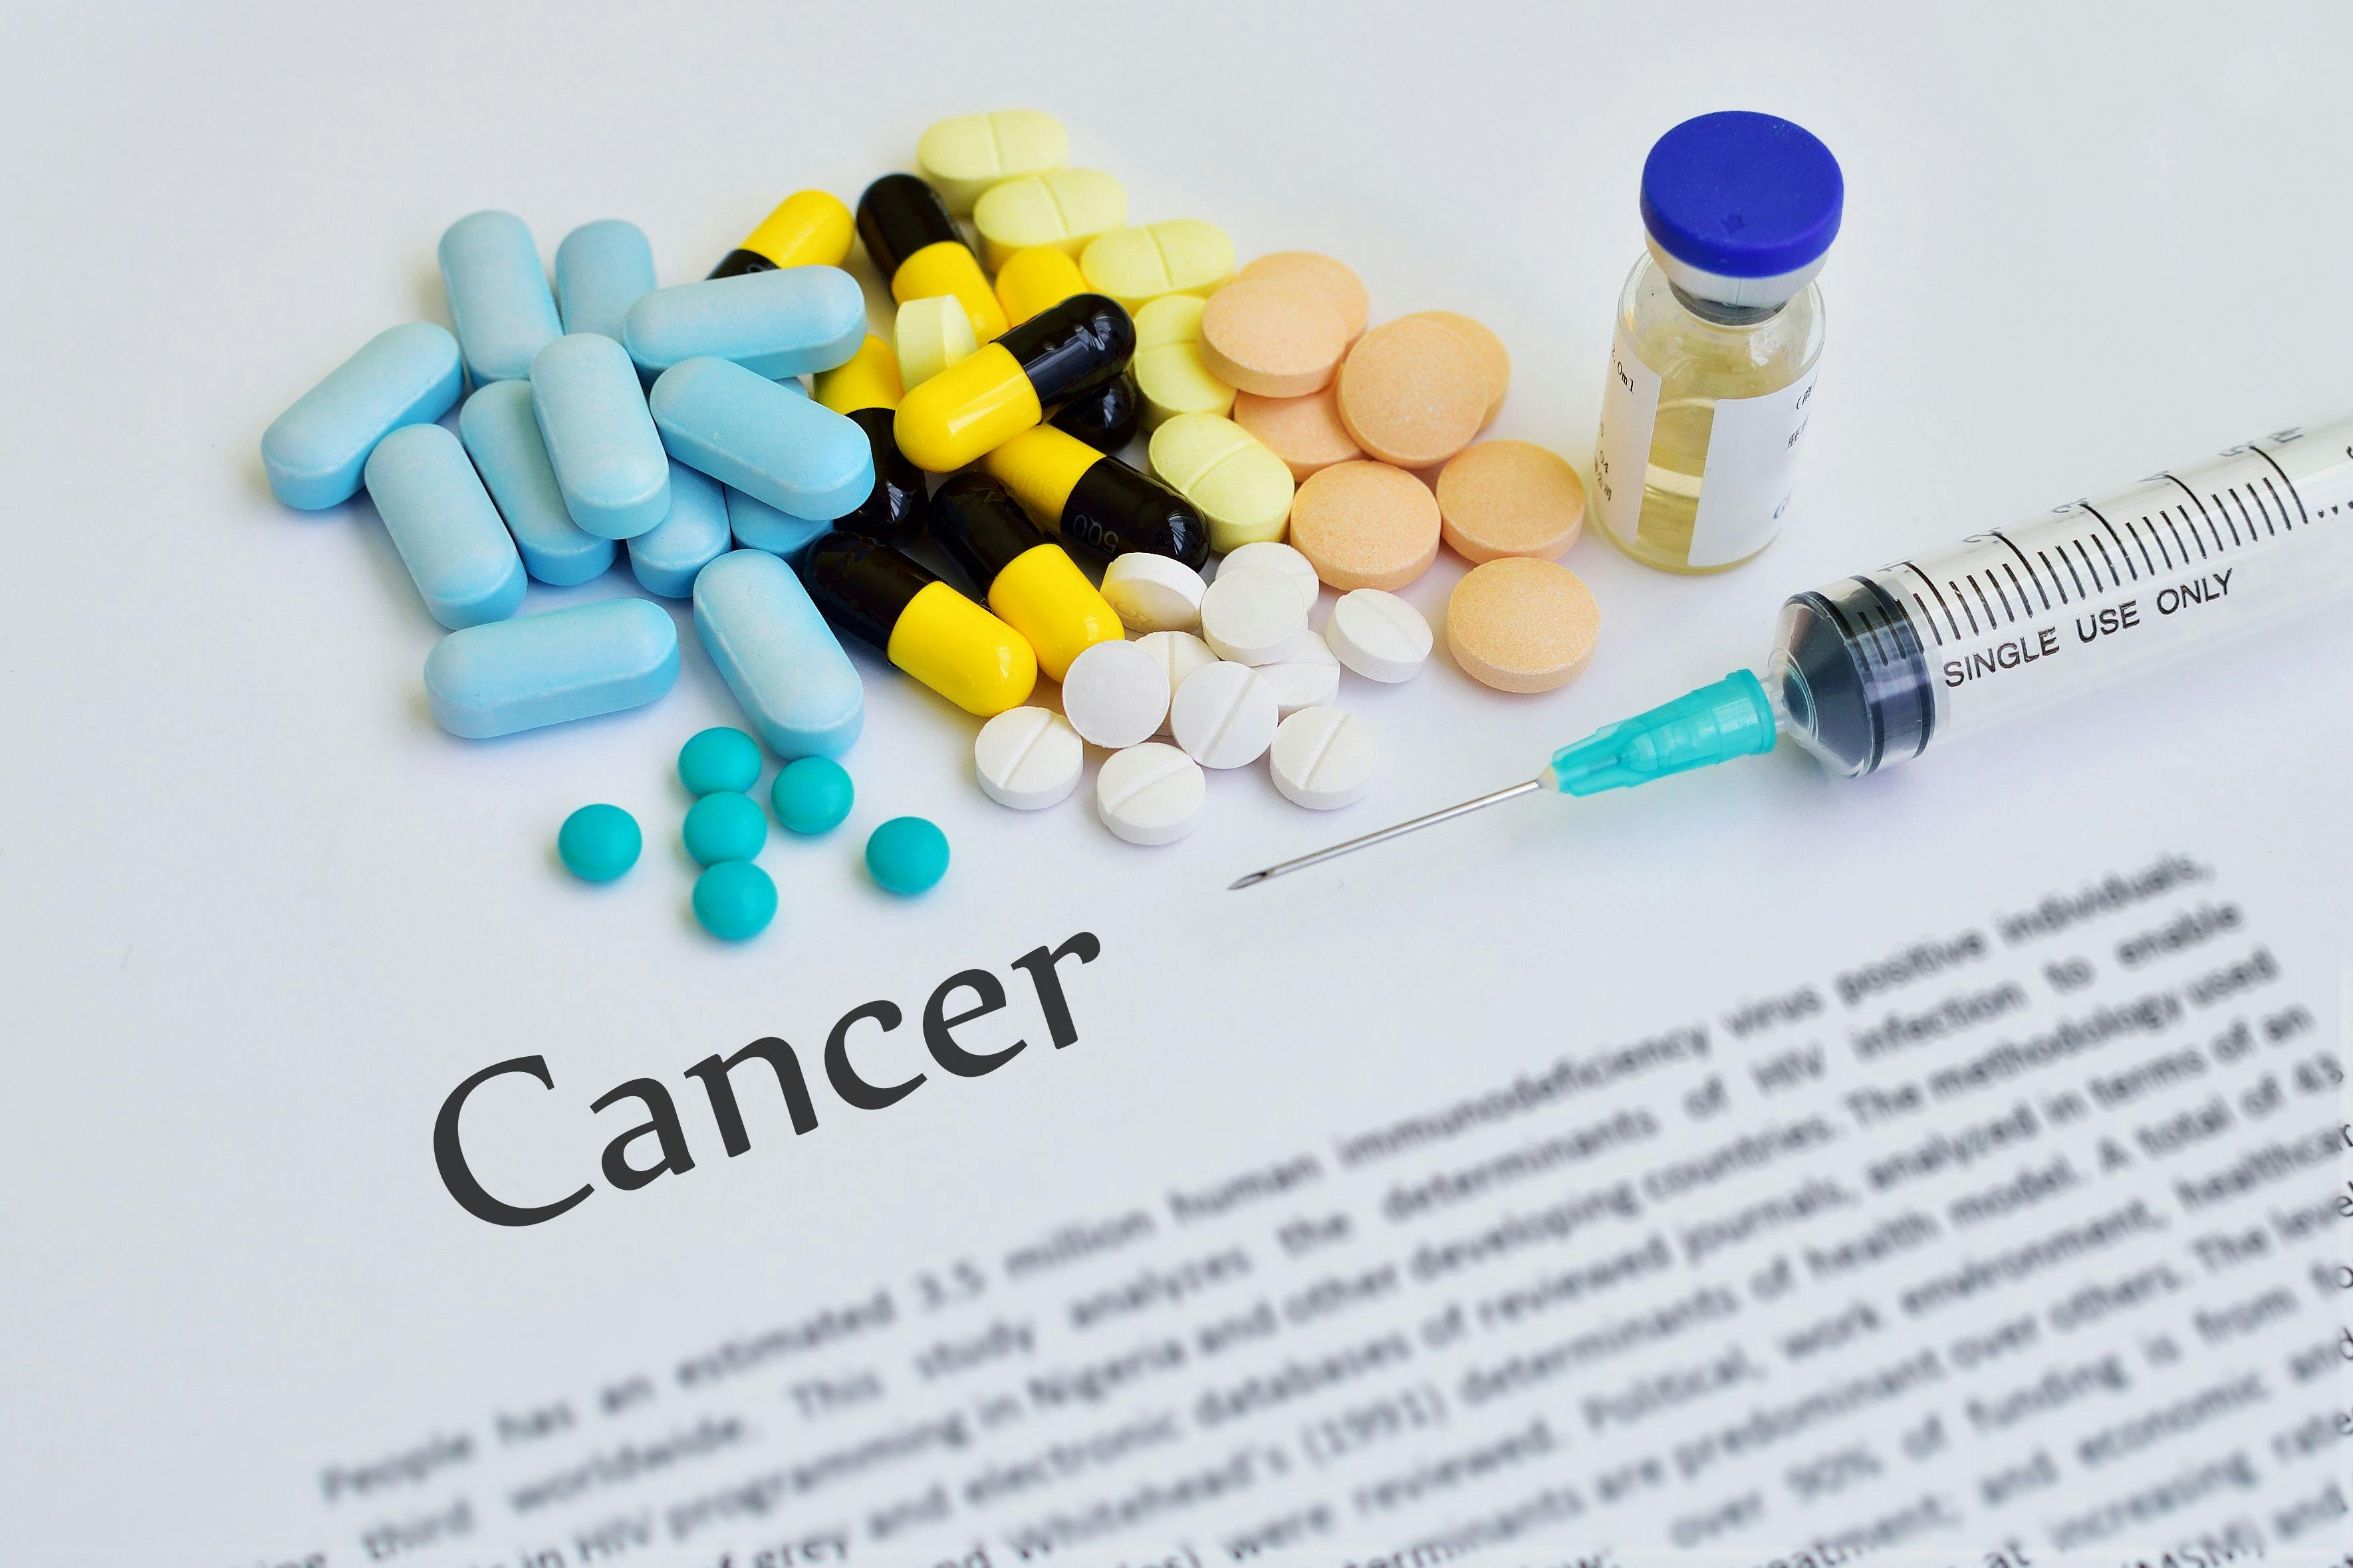 Study: Cancer Deaths Rise 20.9% to 10 Million Over 9 Years